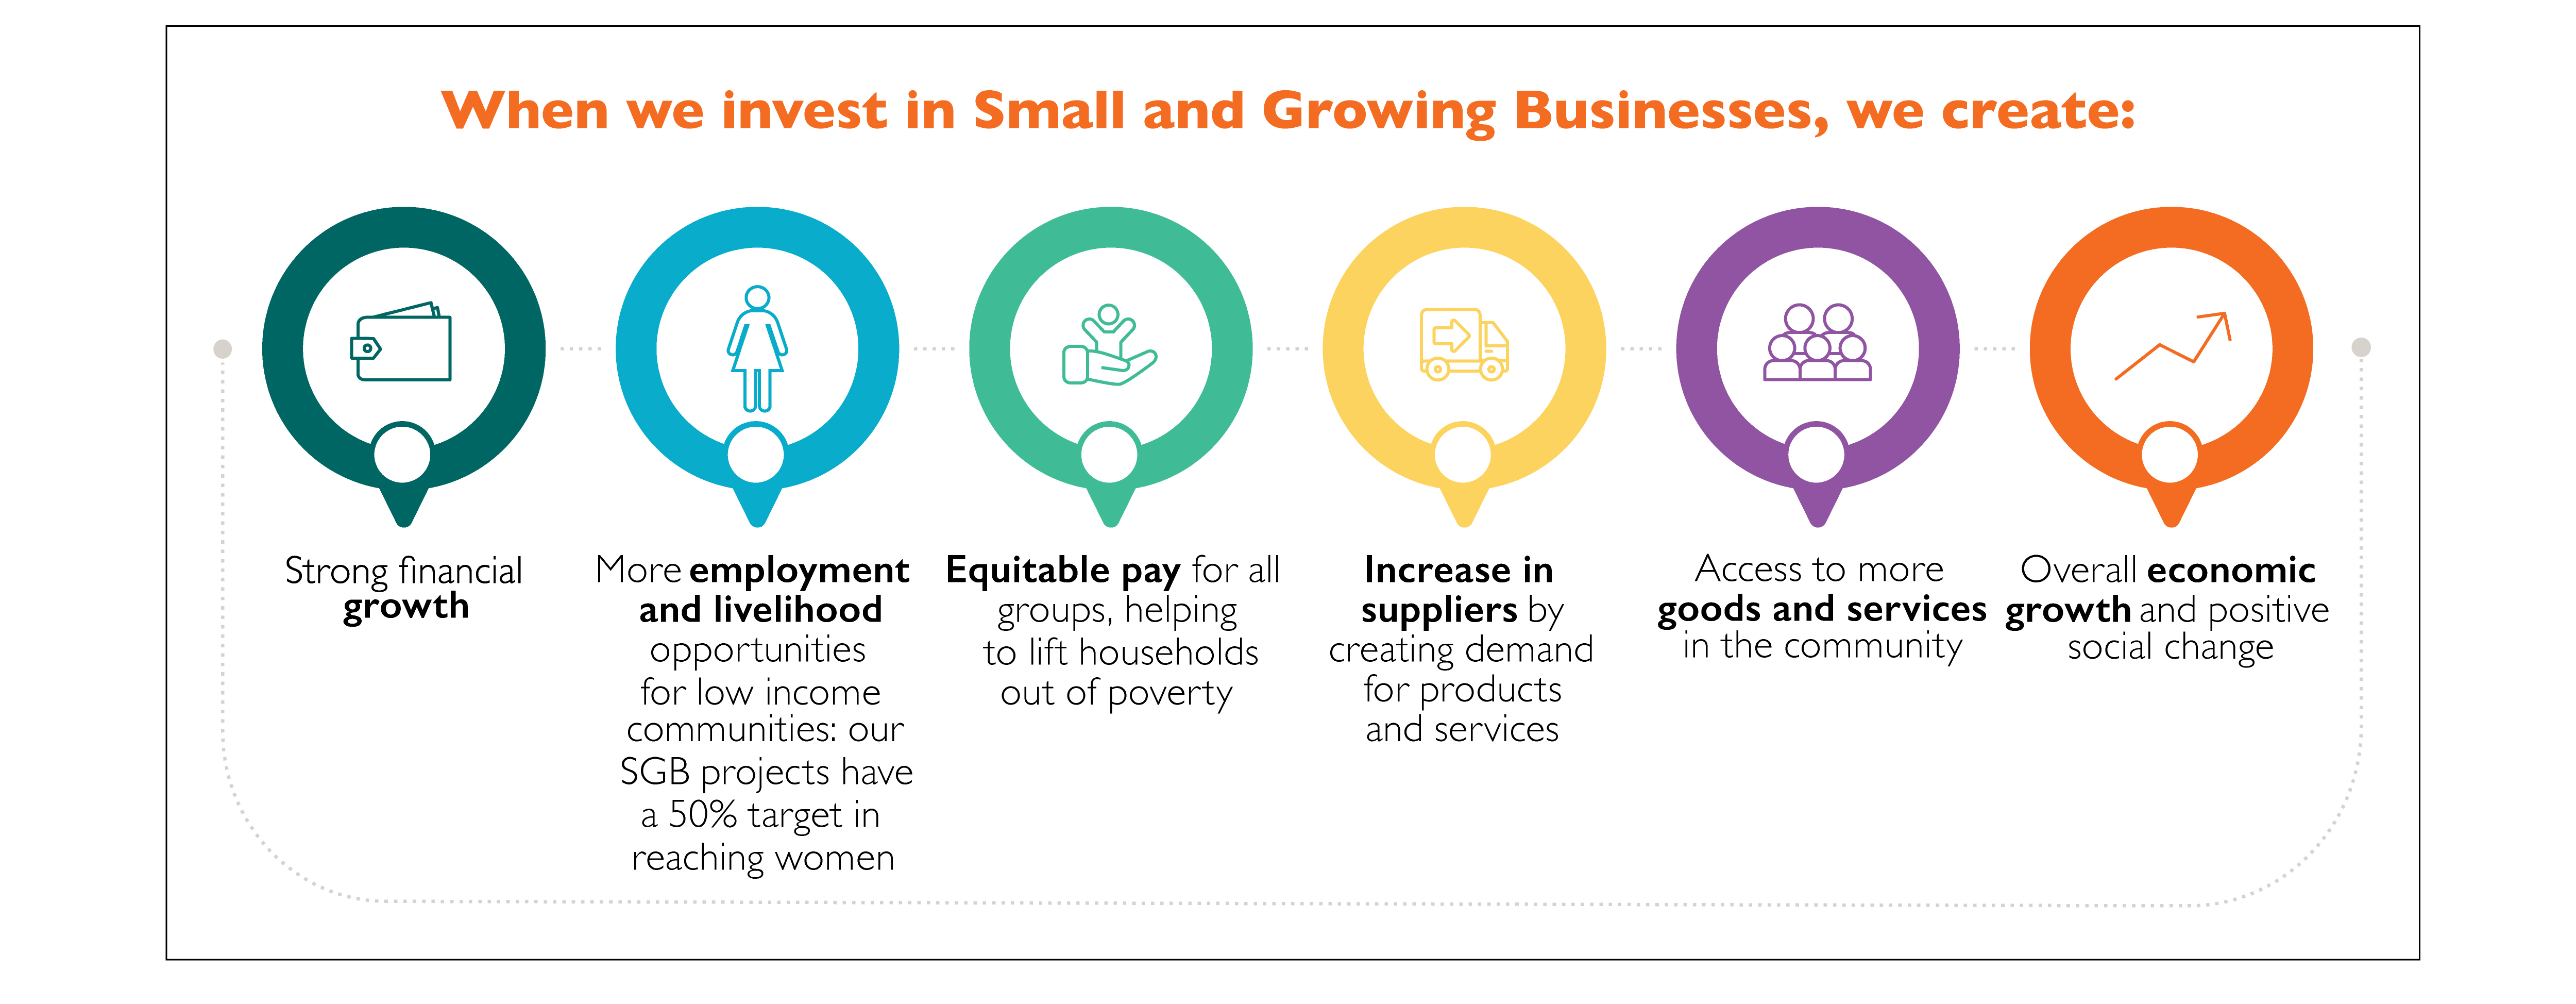 SGB Investing in Small business graphic